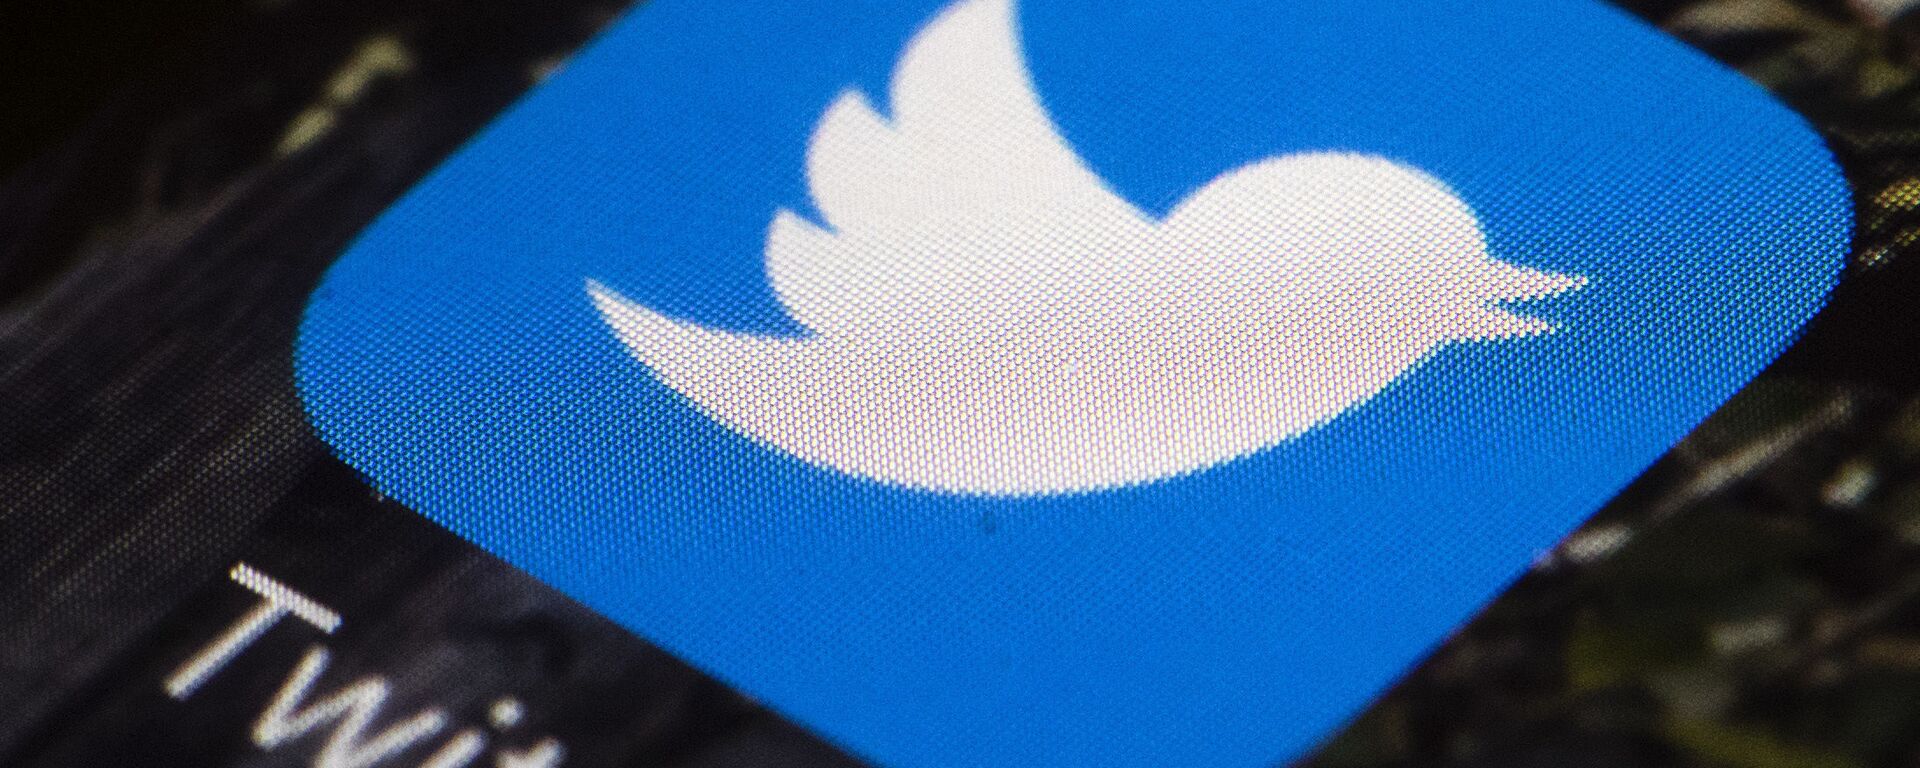 This 26 April 2017 file photo shows the Twitter app icon on a mobile phone in Philadelphia. A tech-focused civil liberties group on Tuesday, 2 June 2020, sued to block President Donald Trump's executive order that seeks to regulate social media, saying it violates the First Amendment and prevents free speech. - Sputnik International, 1920, 10.03.2021